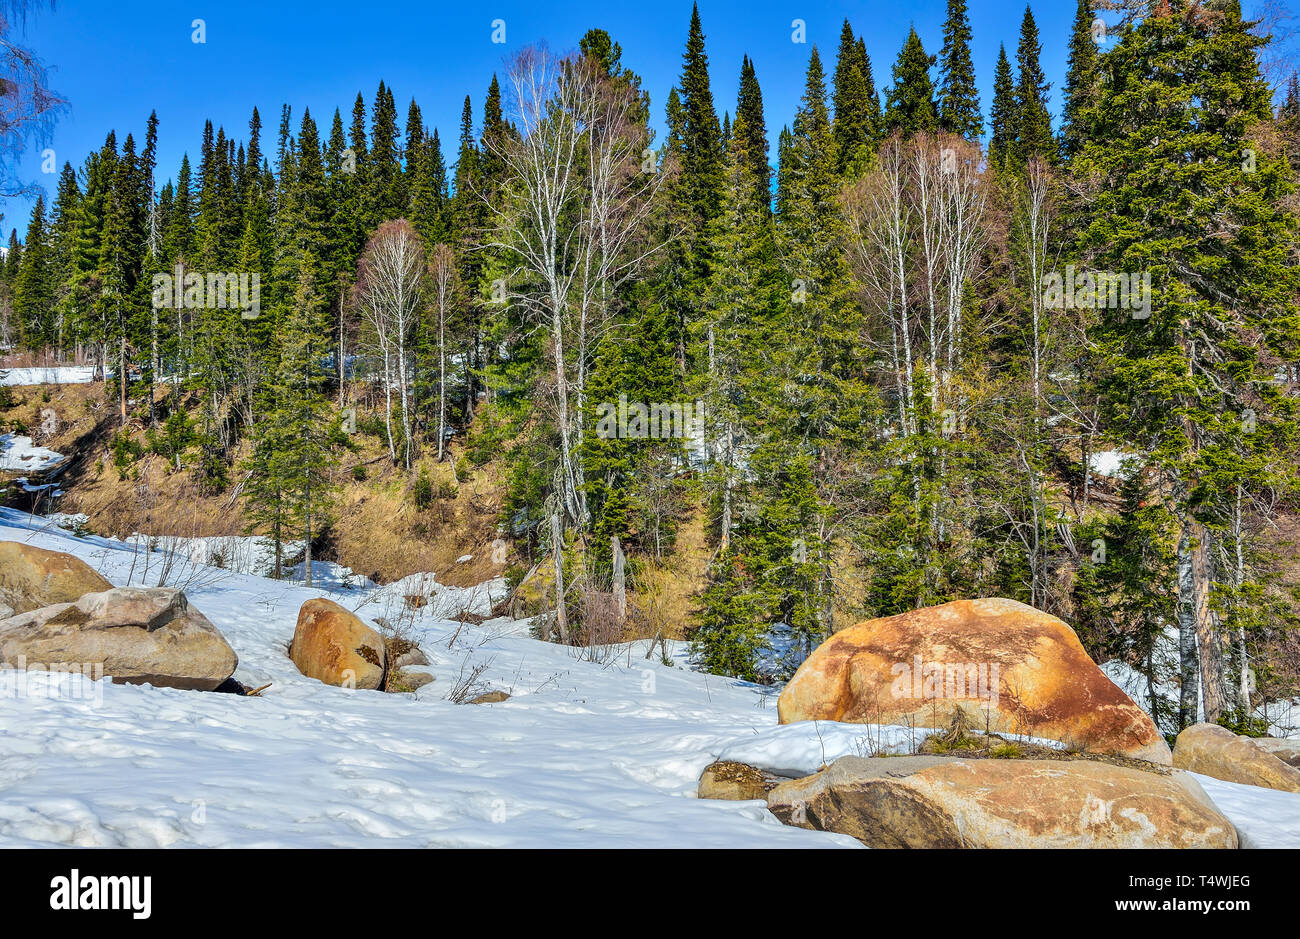 Early spring in mountain coniferous forest. Mountain slope is covered with huge boulders and melting snow. Warm sunny day, bright green forest and cle Stock Photo